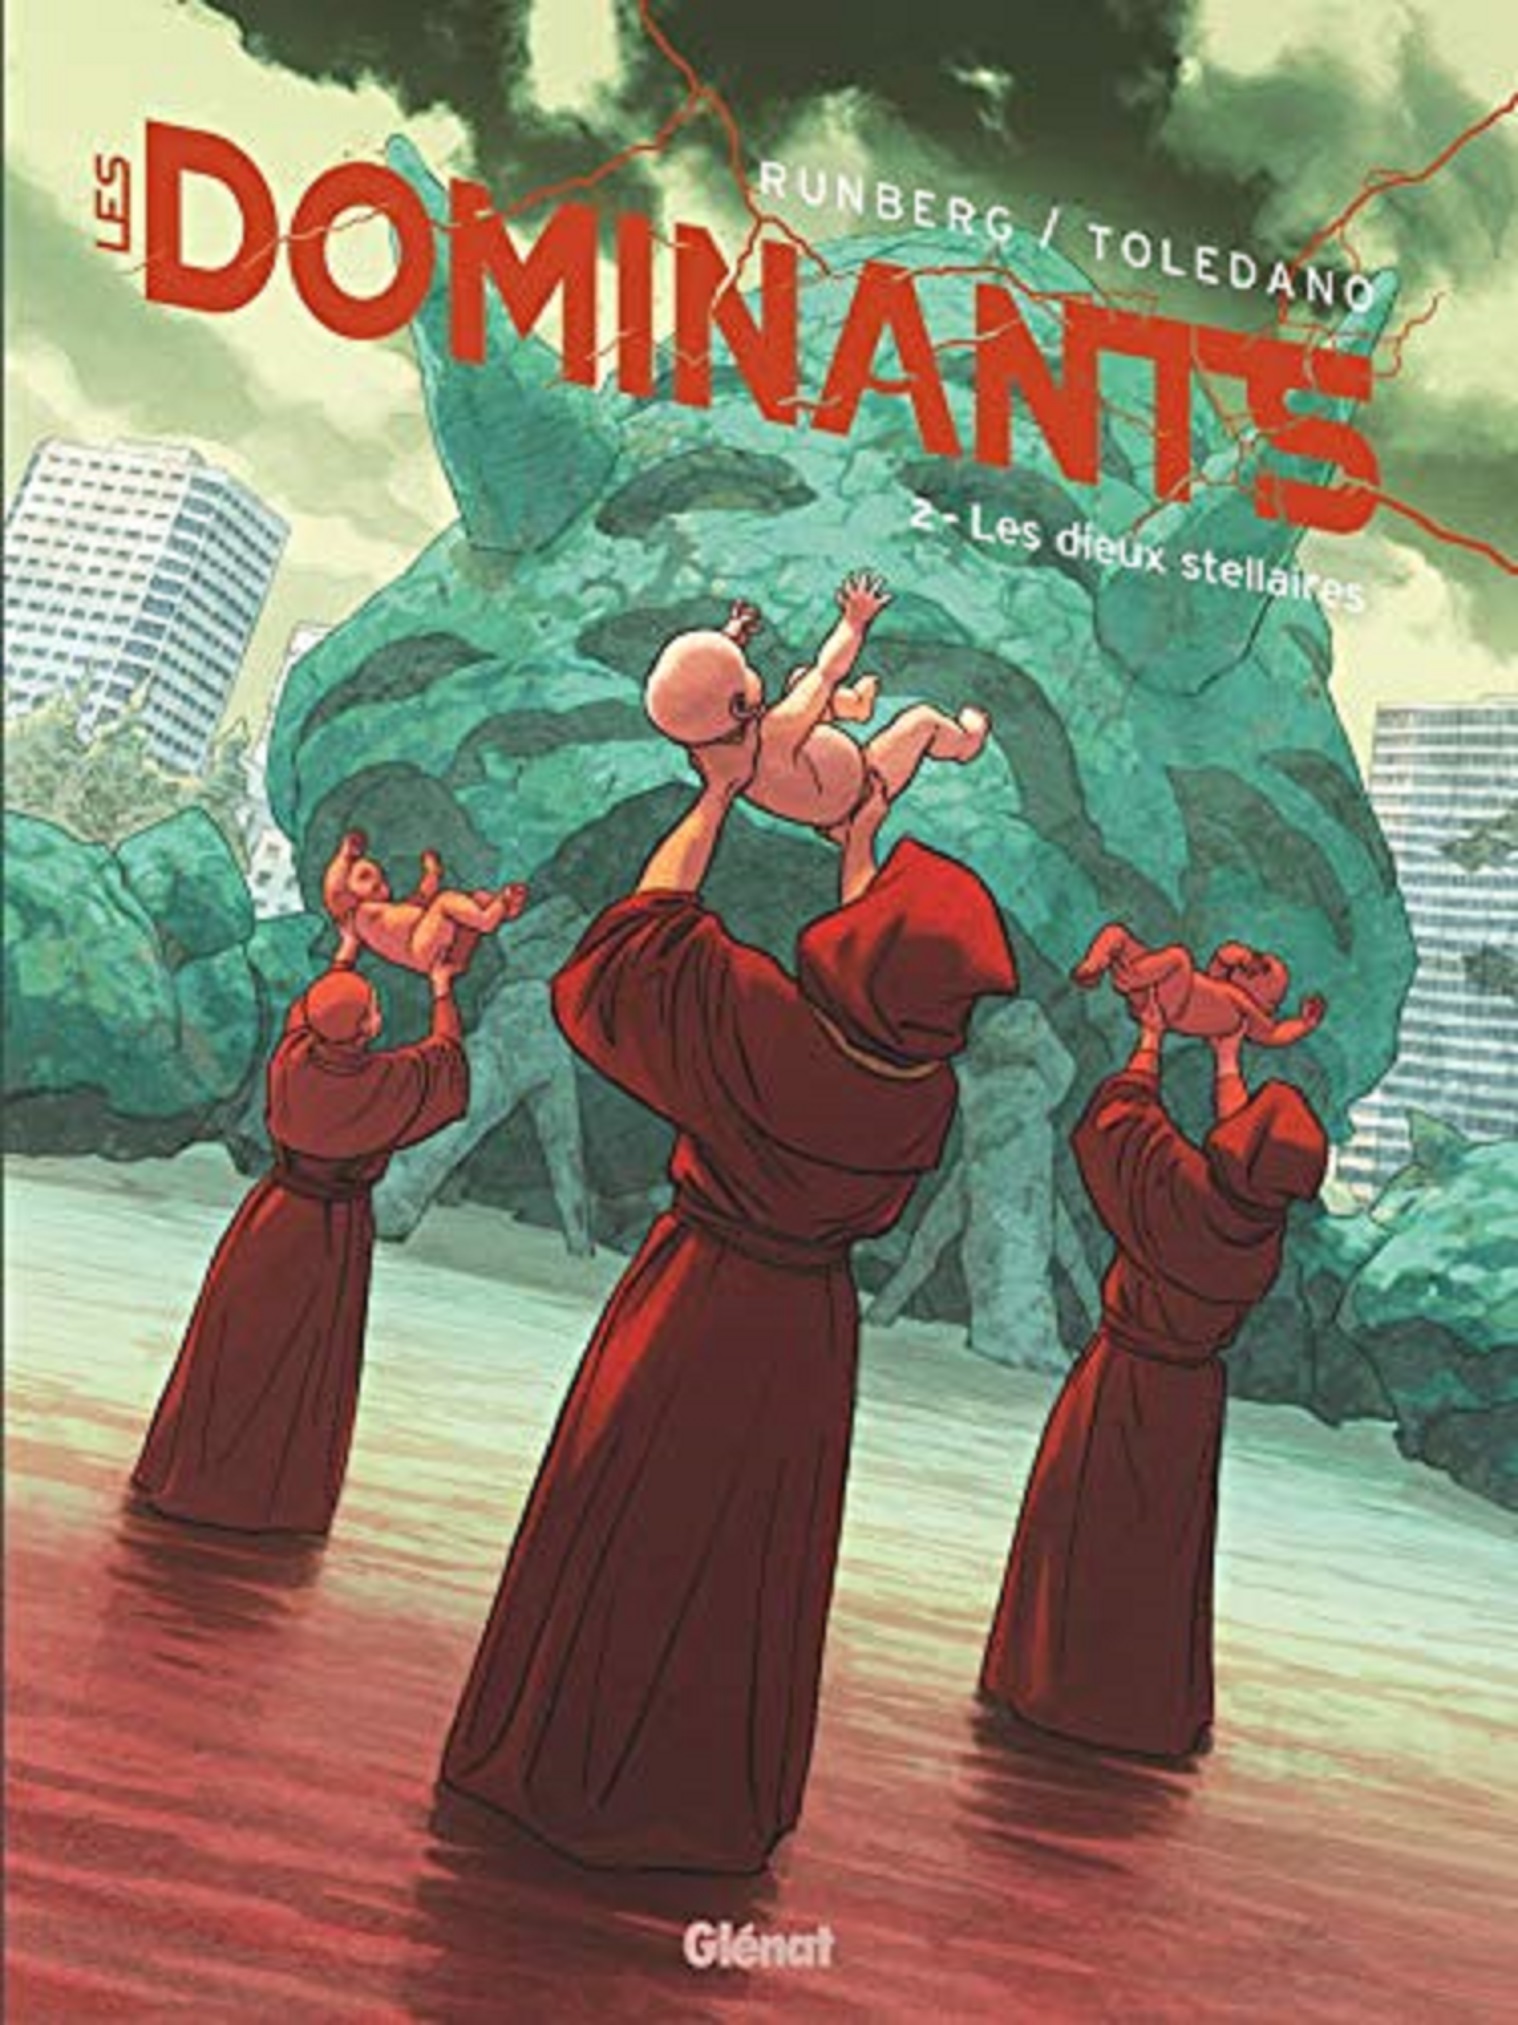 Les Dominants - Tome 2